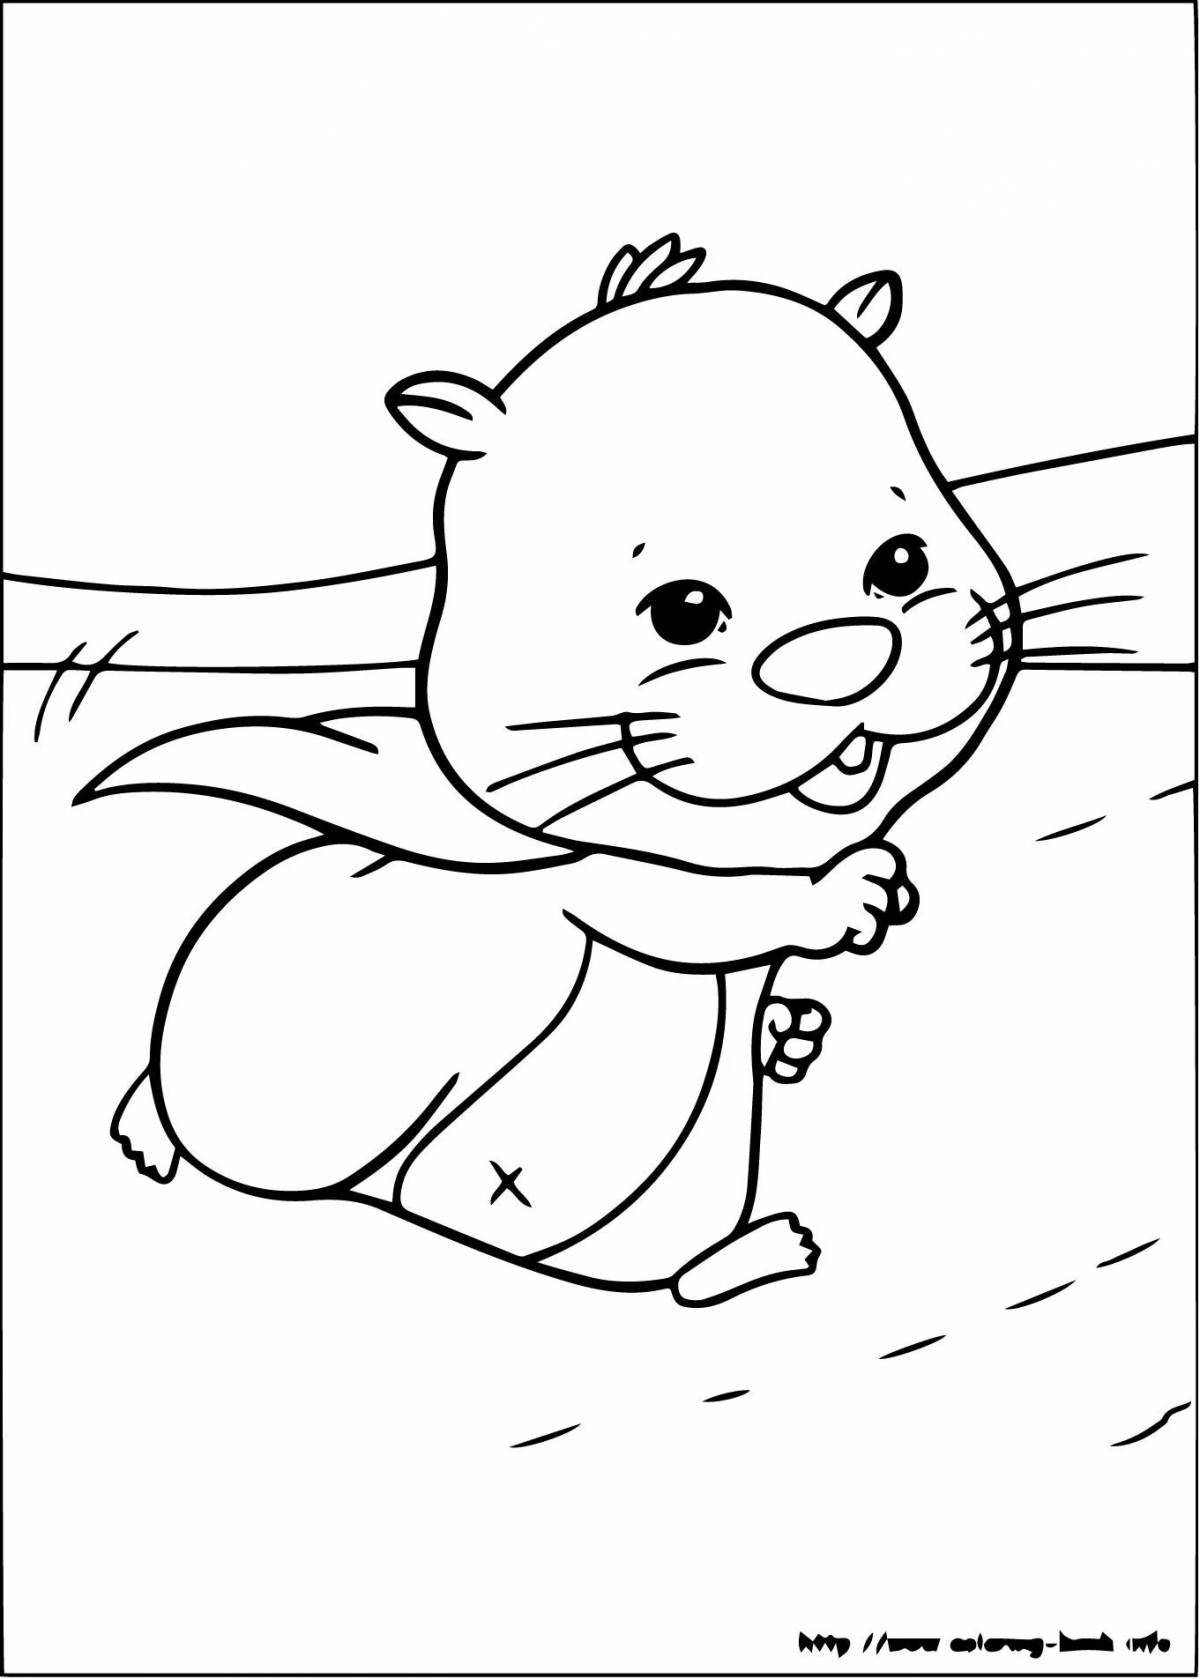 A funny hamster coloring book for kids